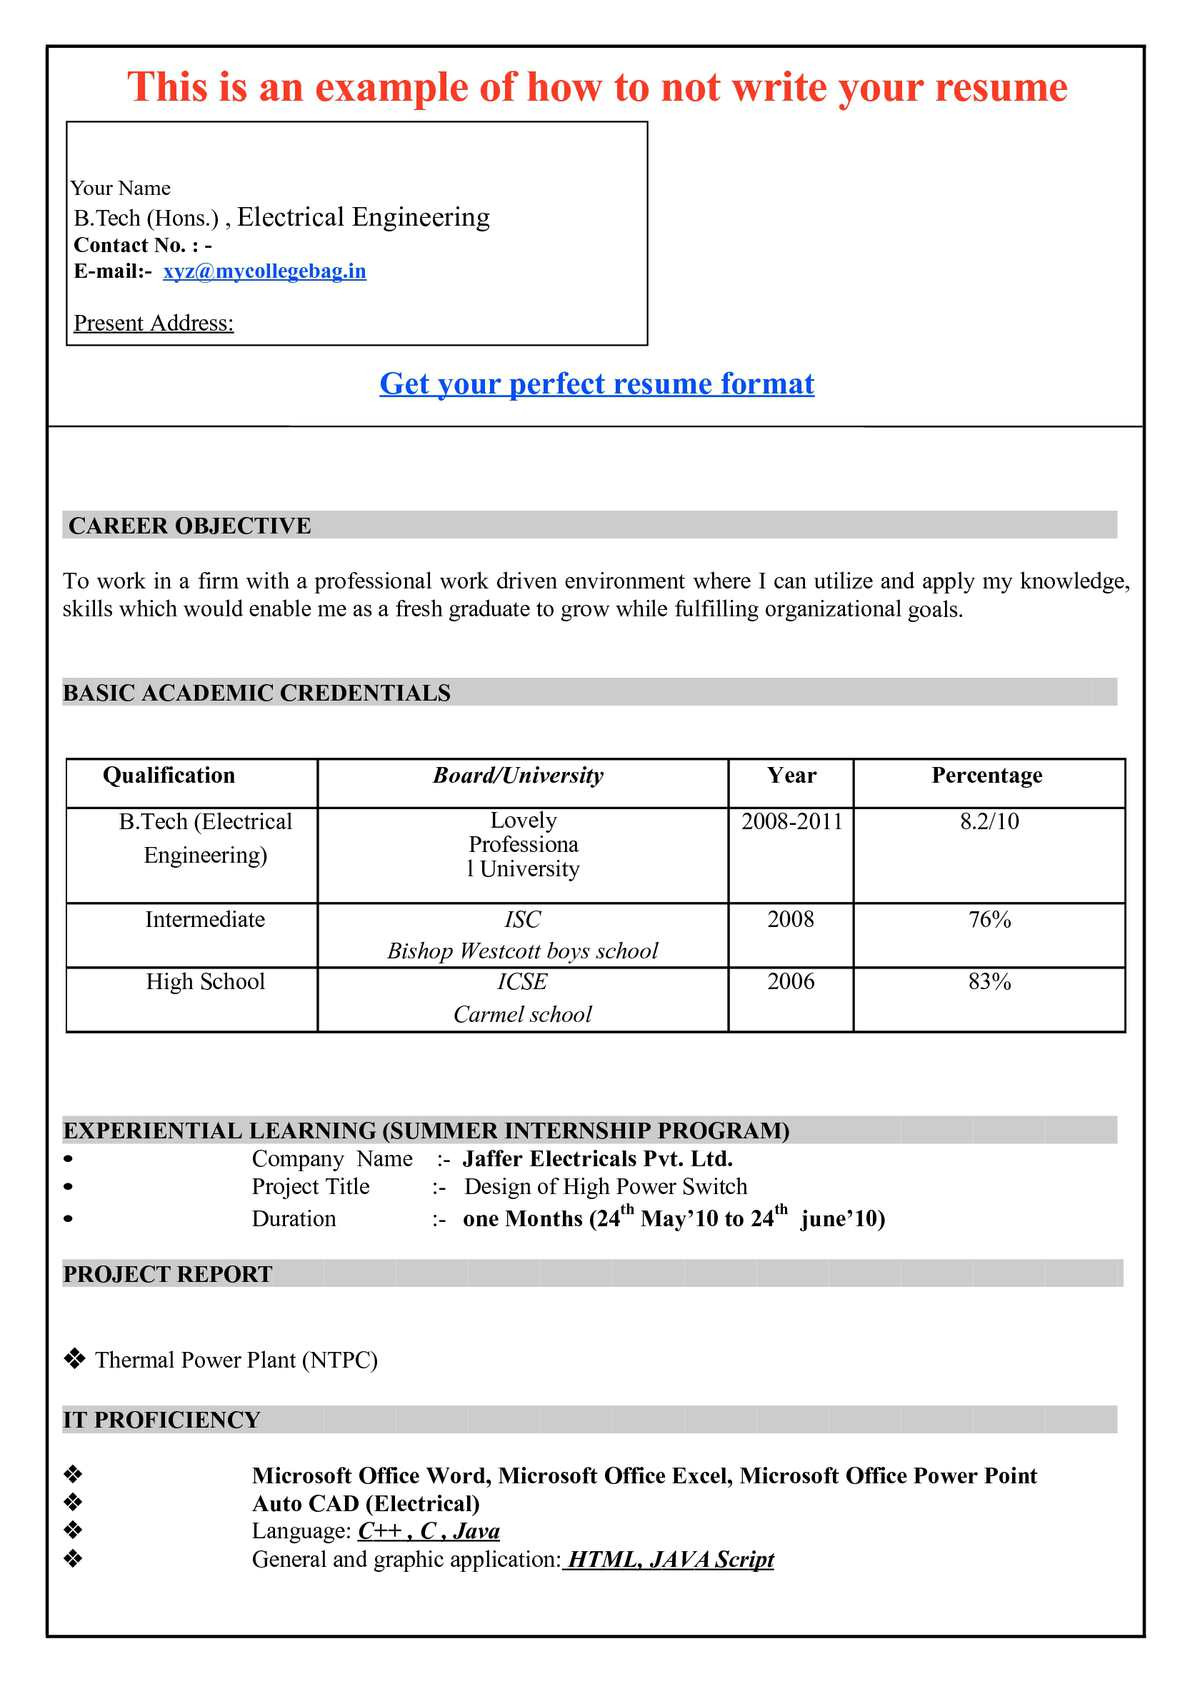 Resume Sample for Electronics and Communication Engineers Fresher Pdf CalamÃ©o – Samples Resume for Freshers Engineers Pdf